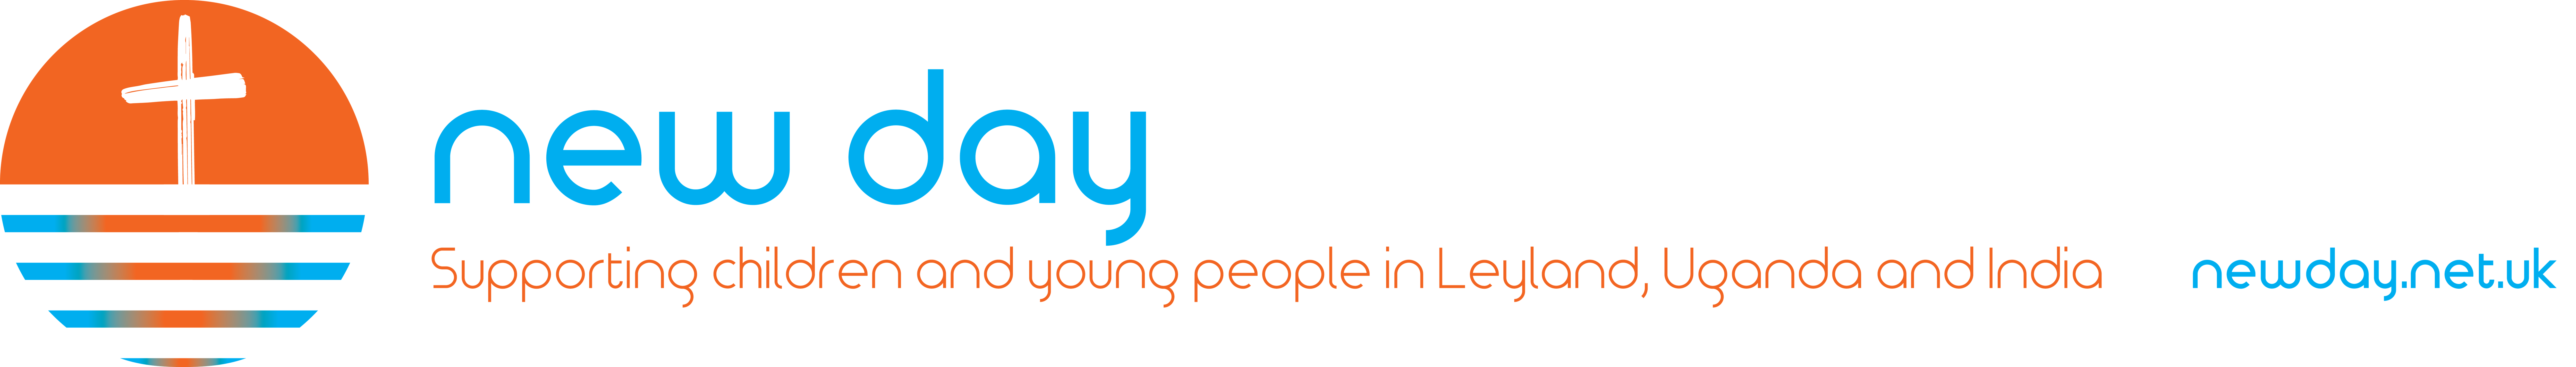 New Day Homes and Hope Charity Shop